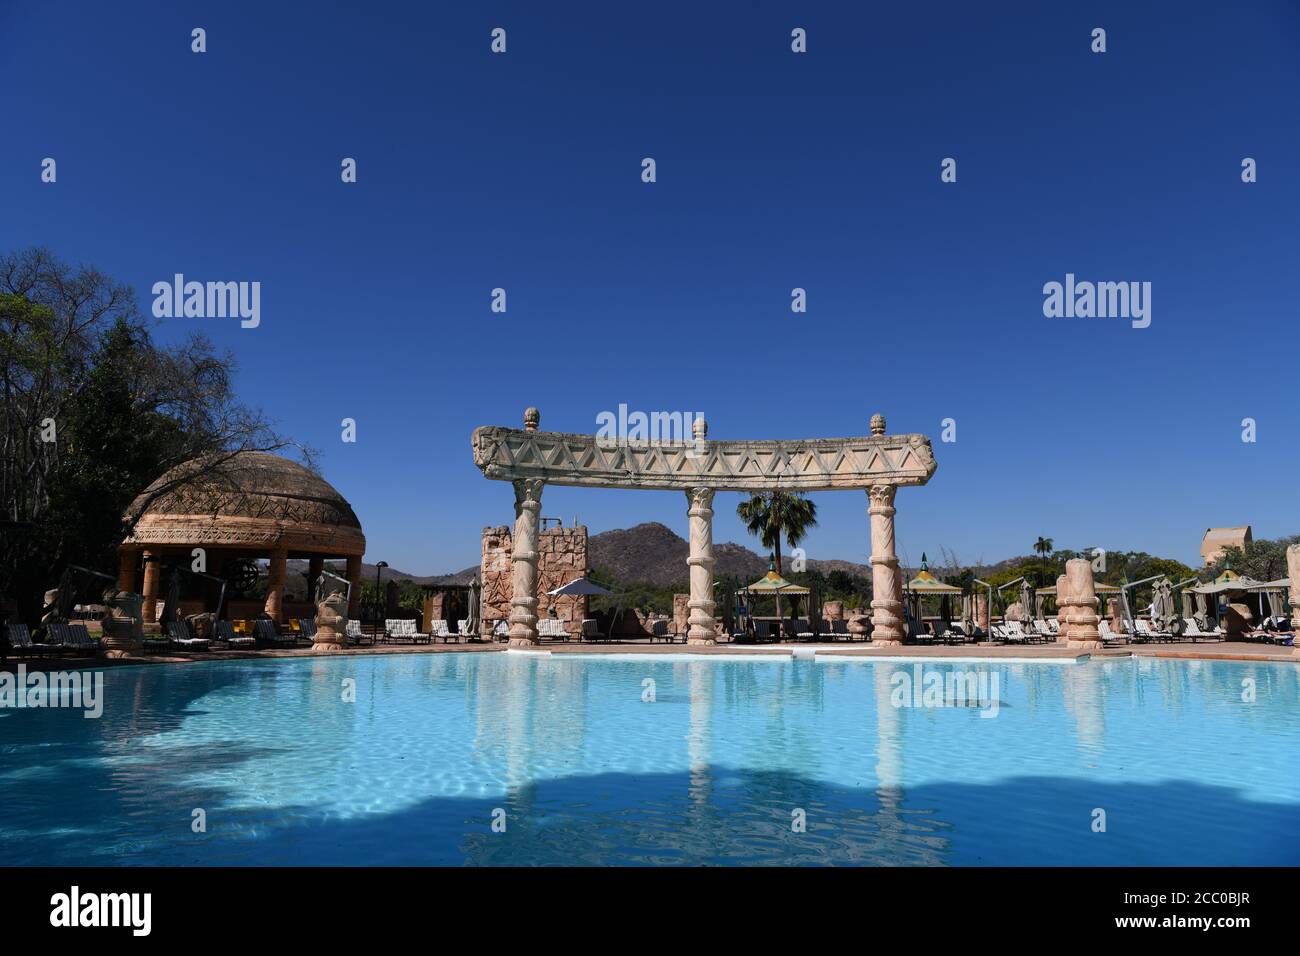 Swimming pool at the Lost City Complex Sun City, South Africa Stock Photo